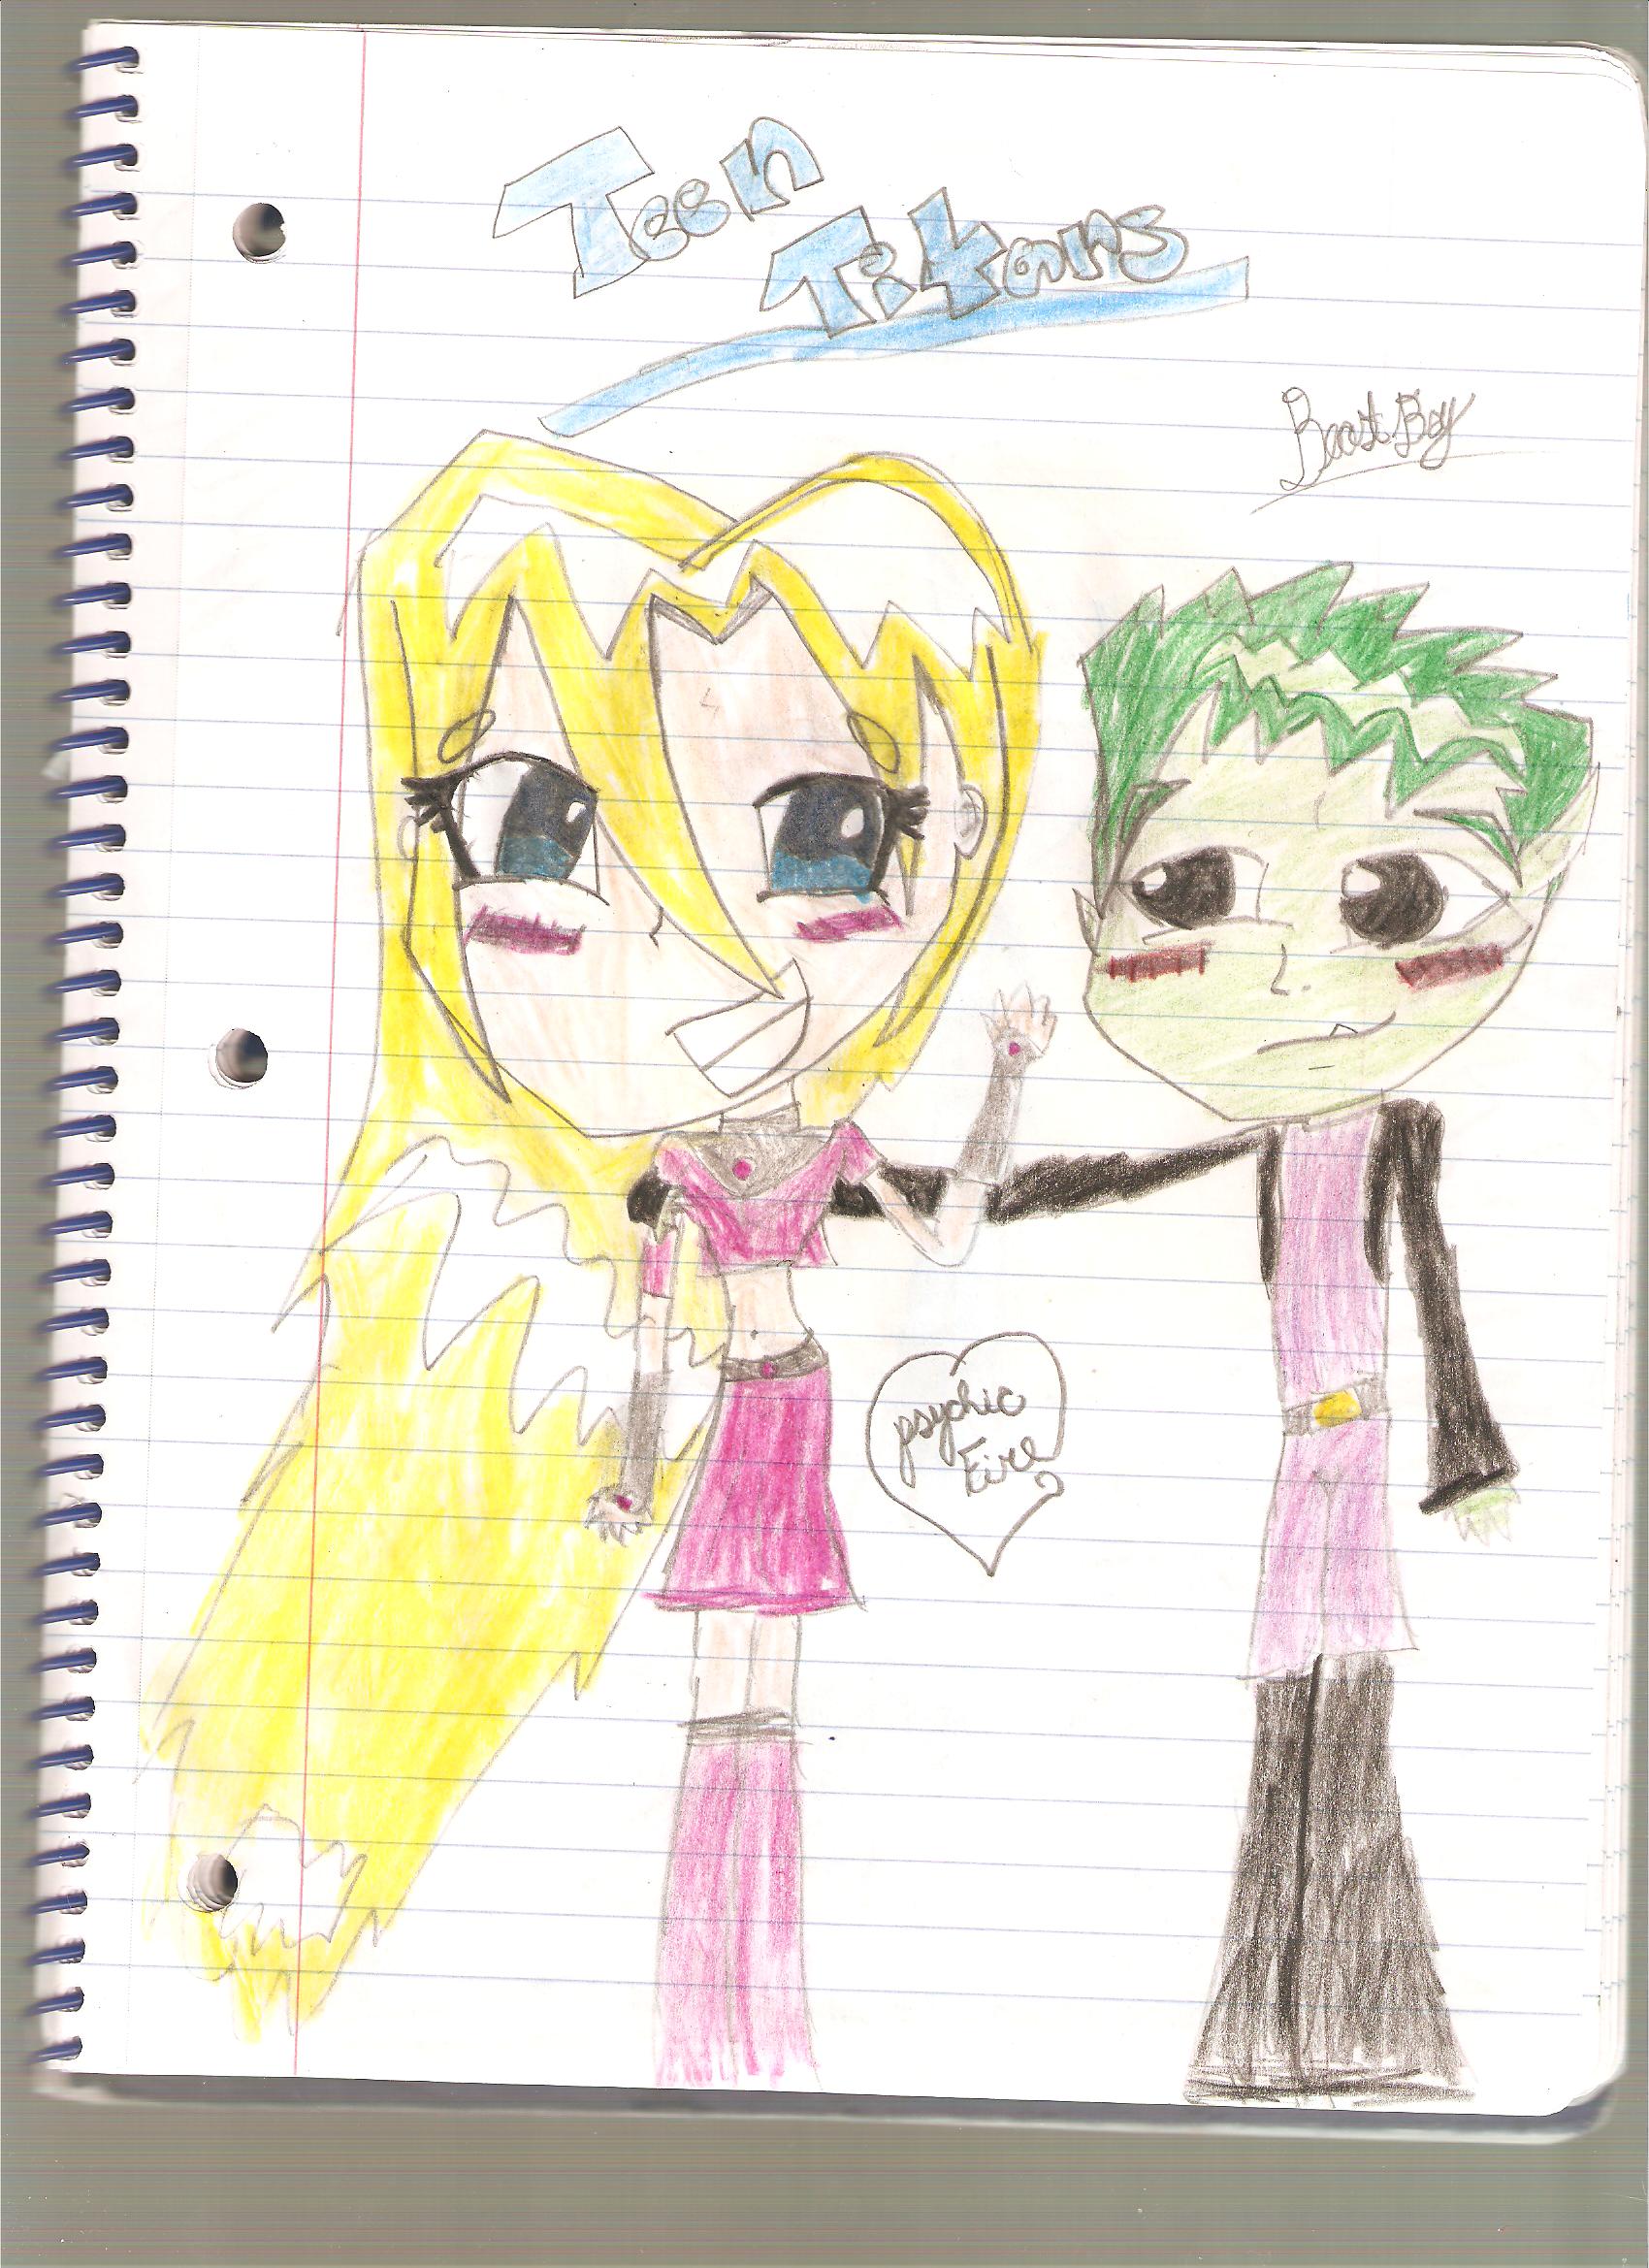 Me and beast boy by SkyGirl